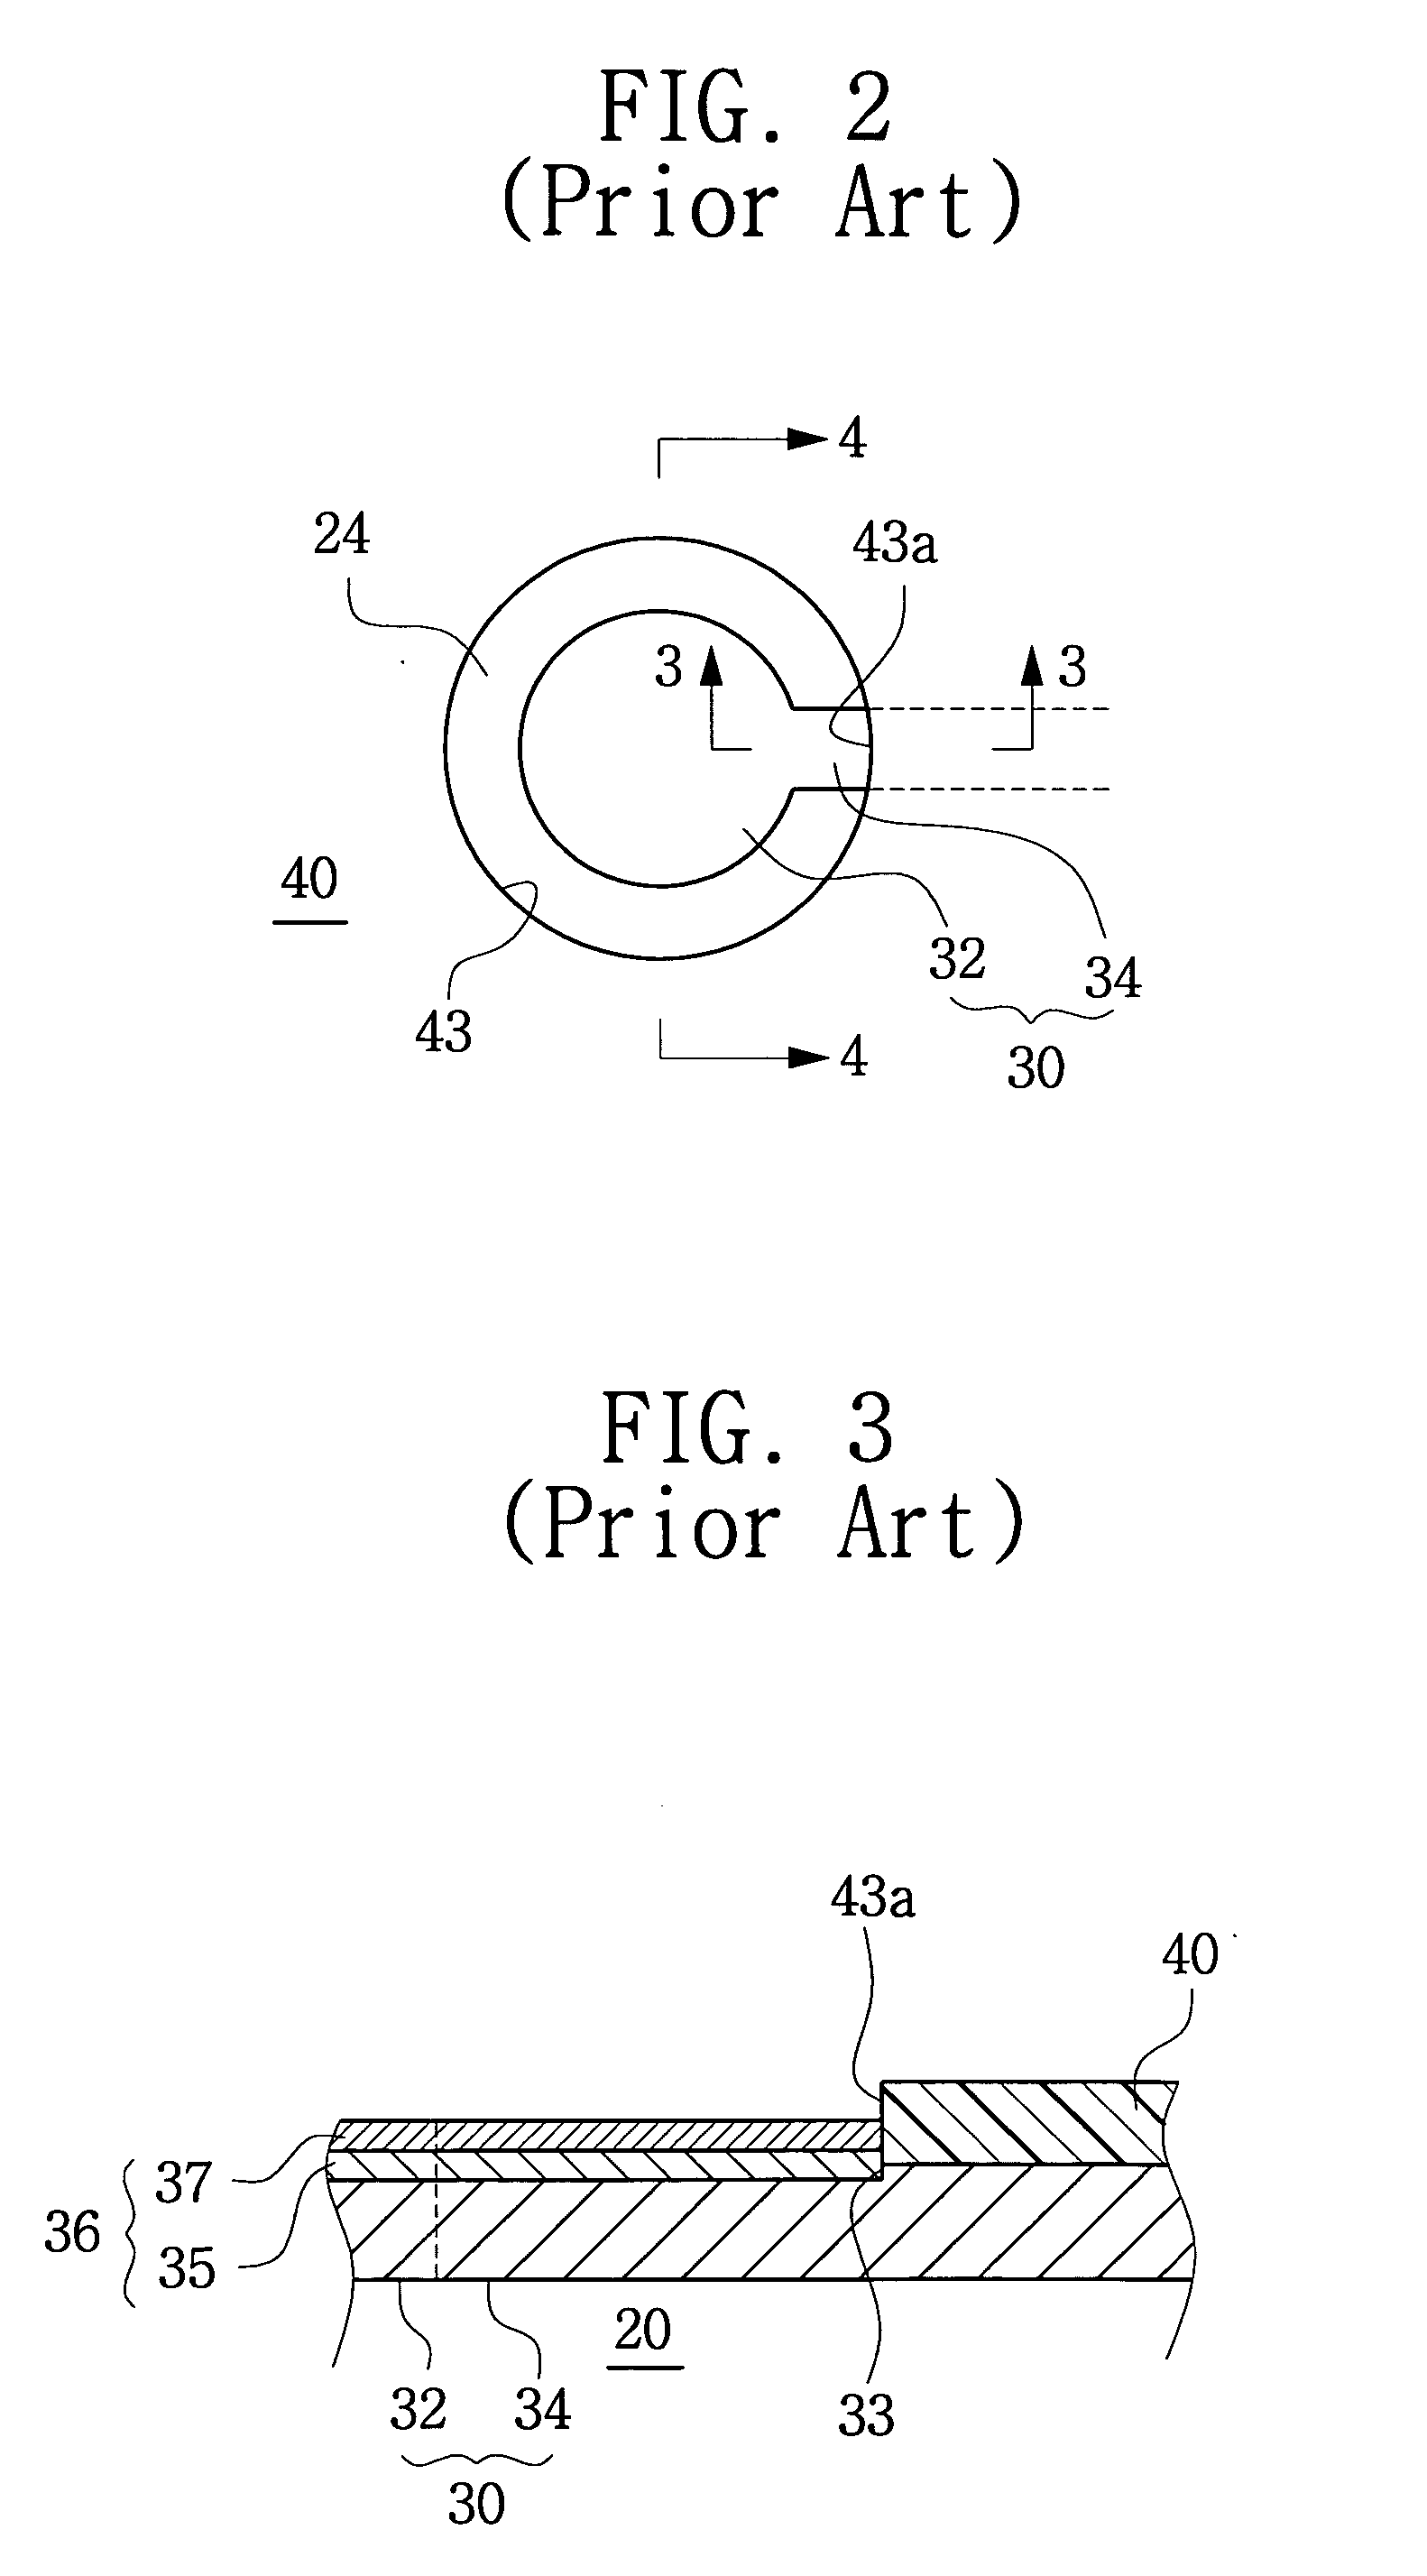 Non-solder mask defined (NSMD) type wiring substrate for ball grid array (BGA) package and method for manufacturing such a wiring substrate